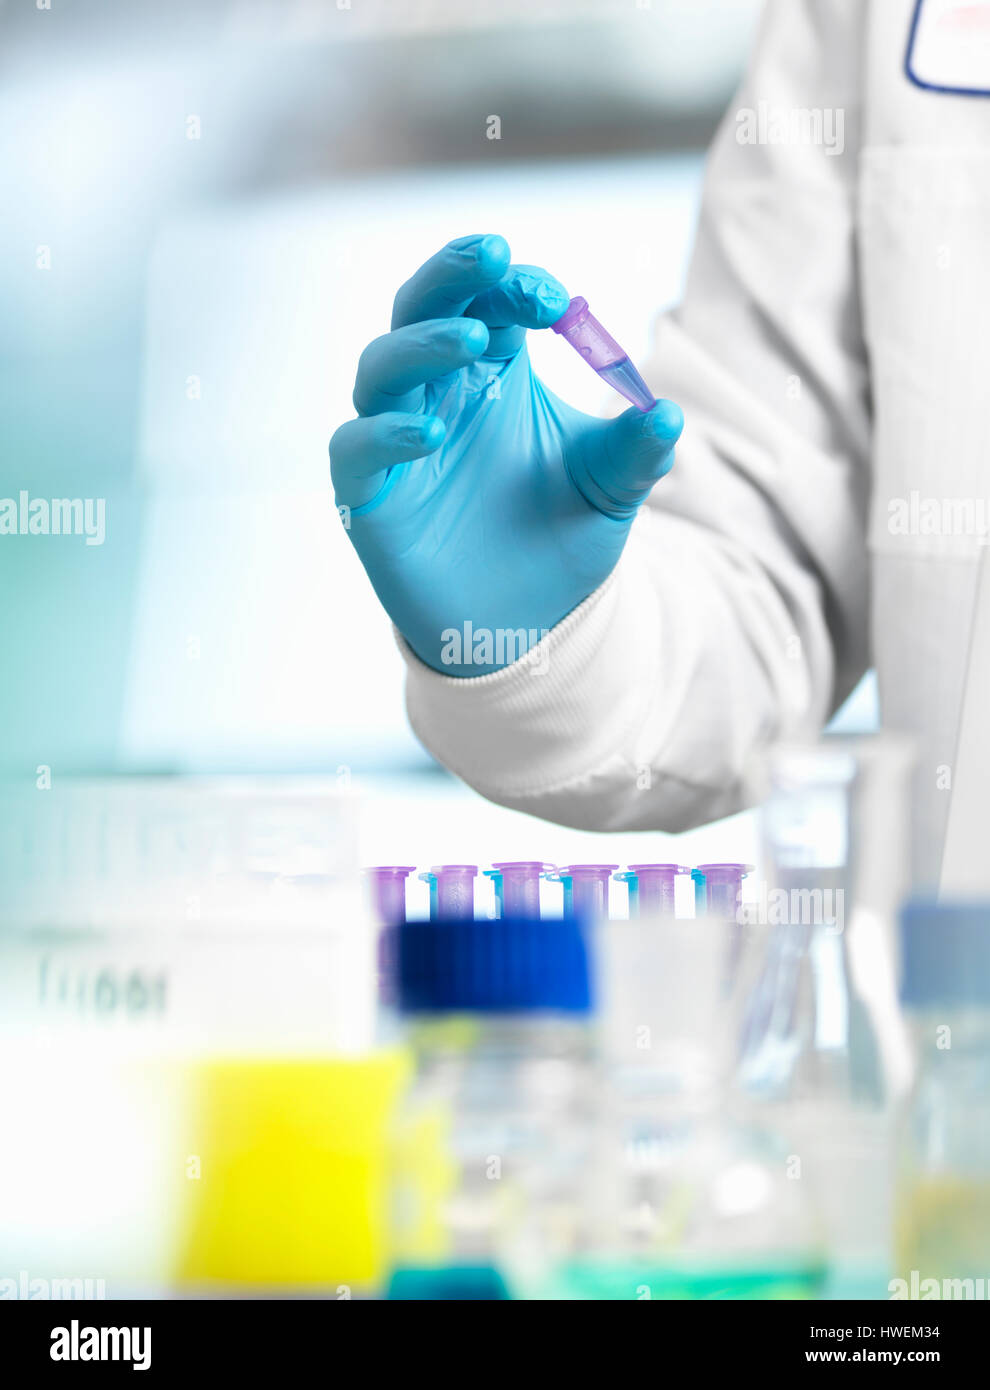 Life Science, scientist holding a sample in a eppendorf vial during an experiment in the laboratory Stock Photo